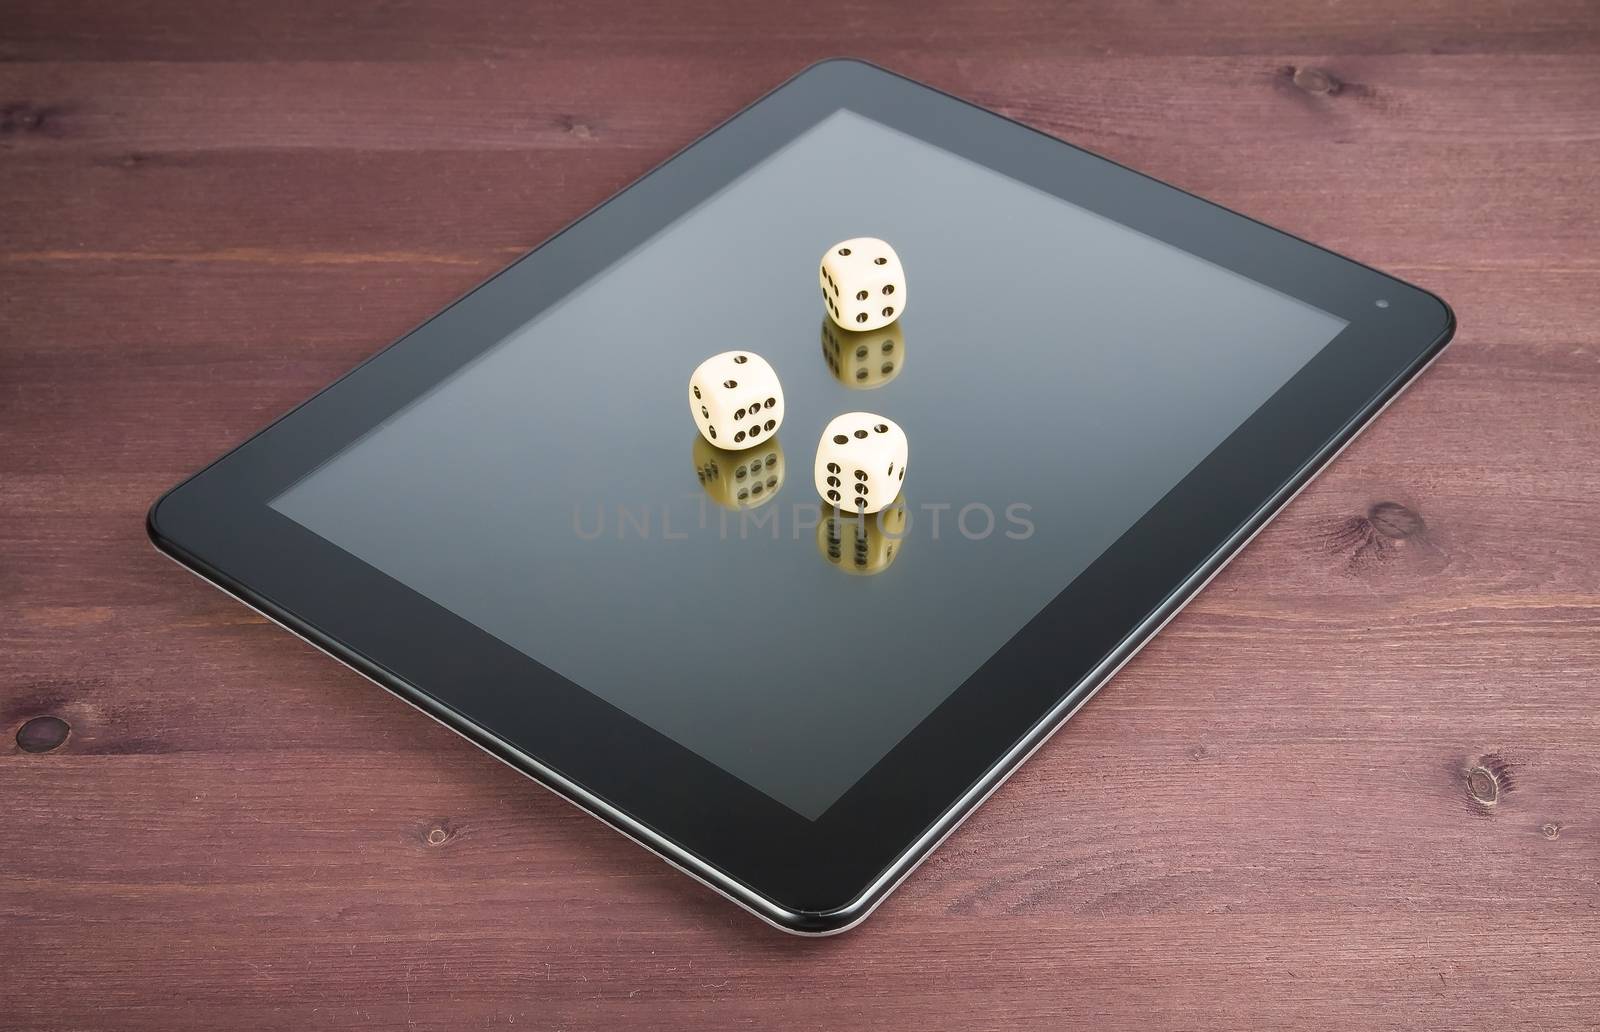 three dice on digital tablet pc, concept of texas game online by donfiore